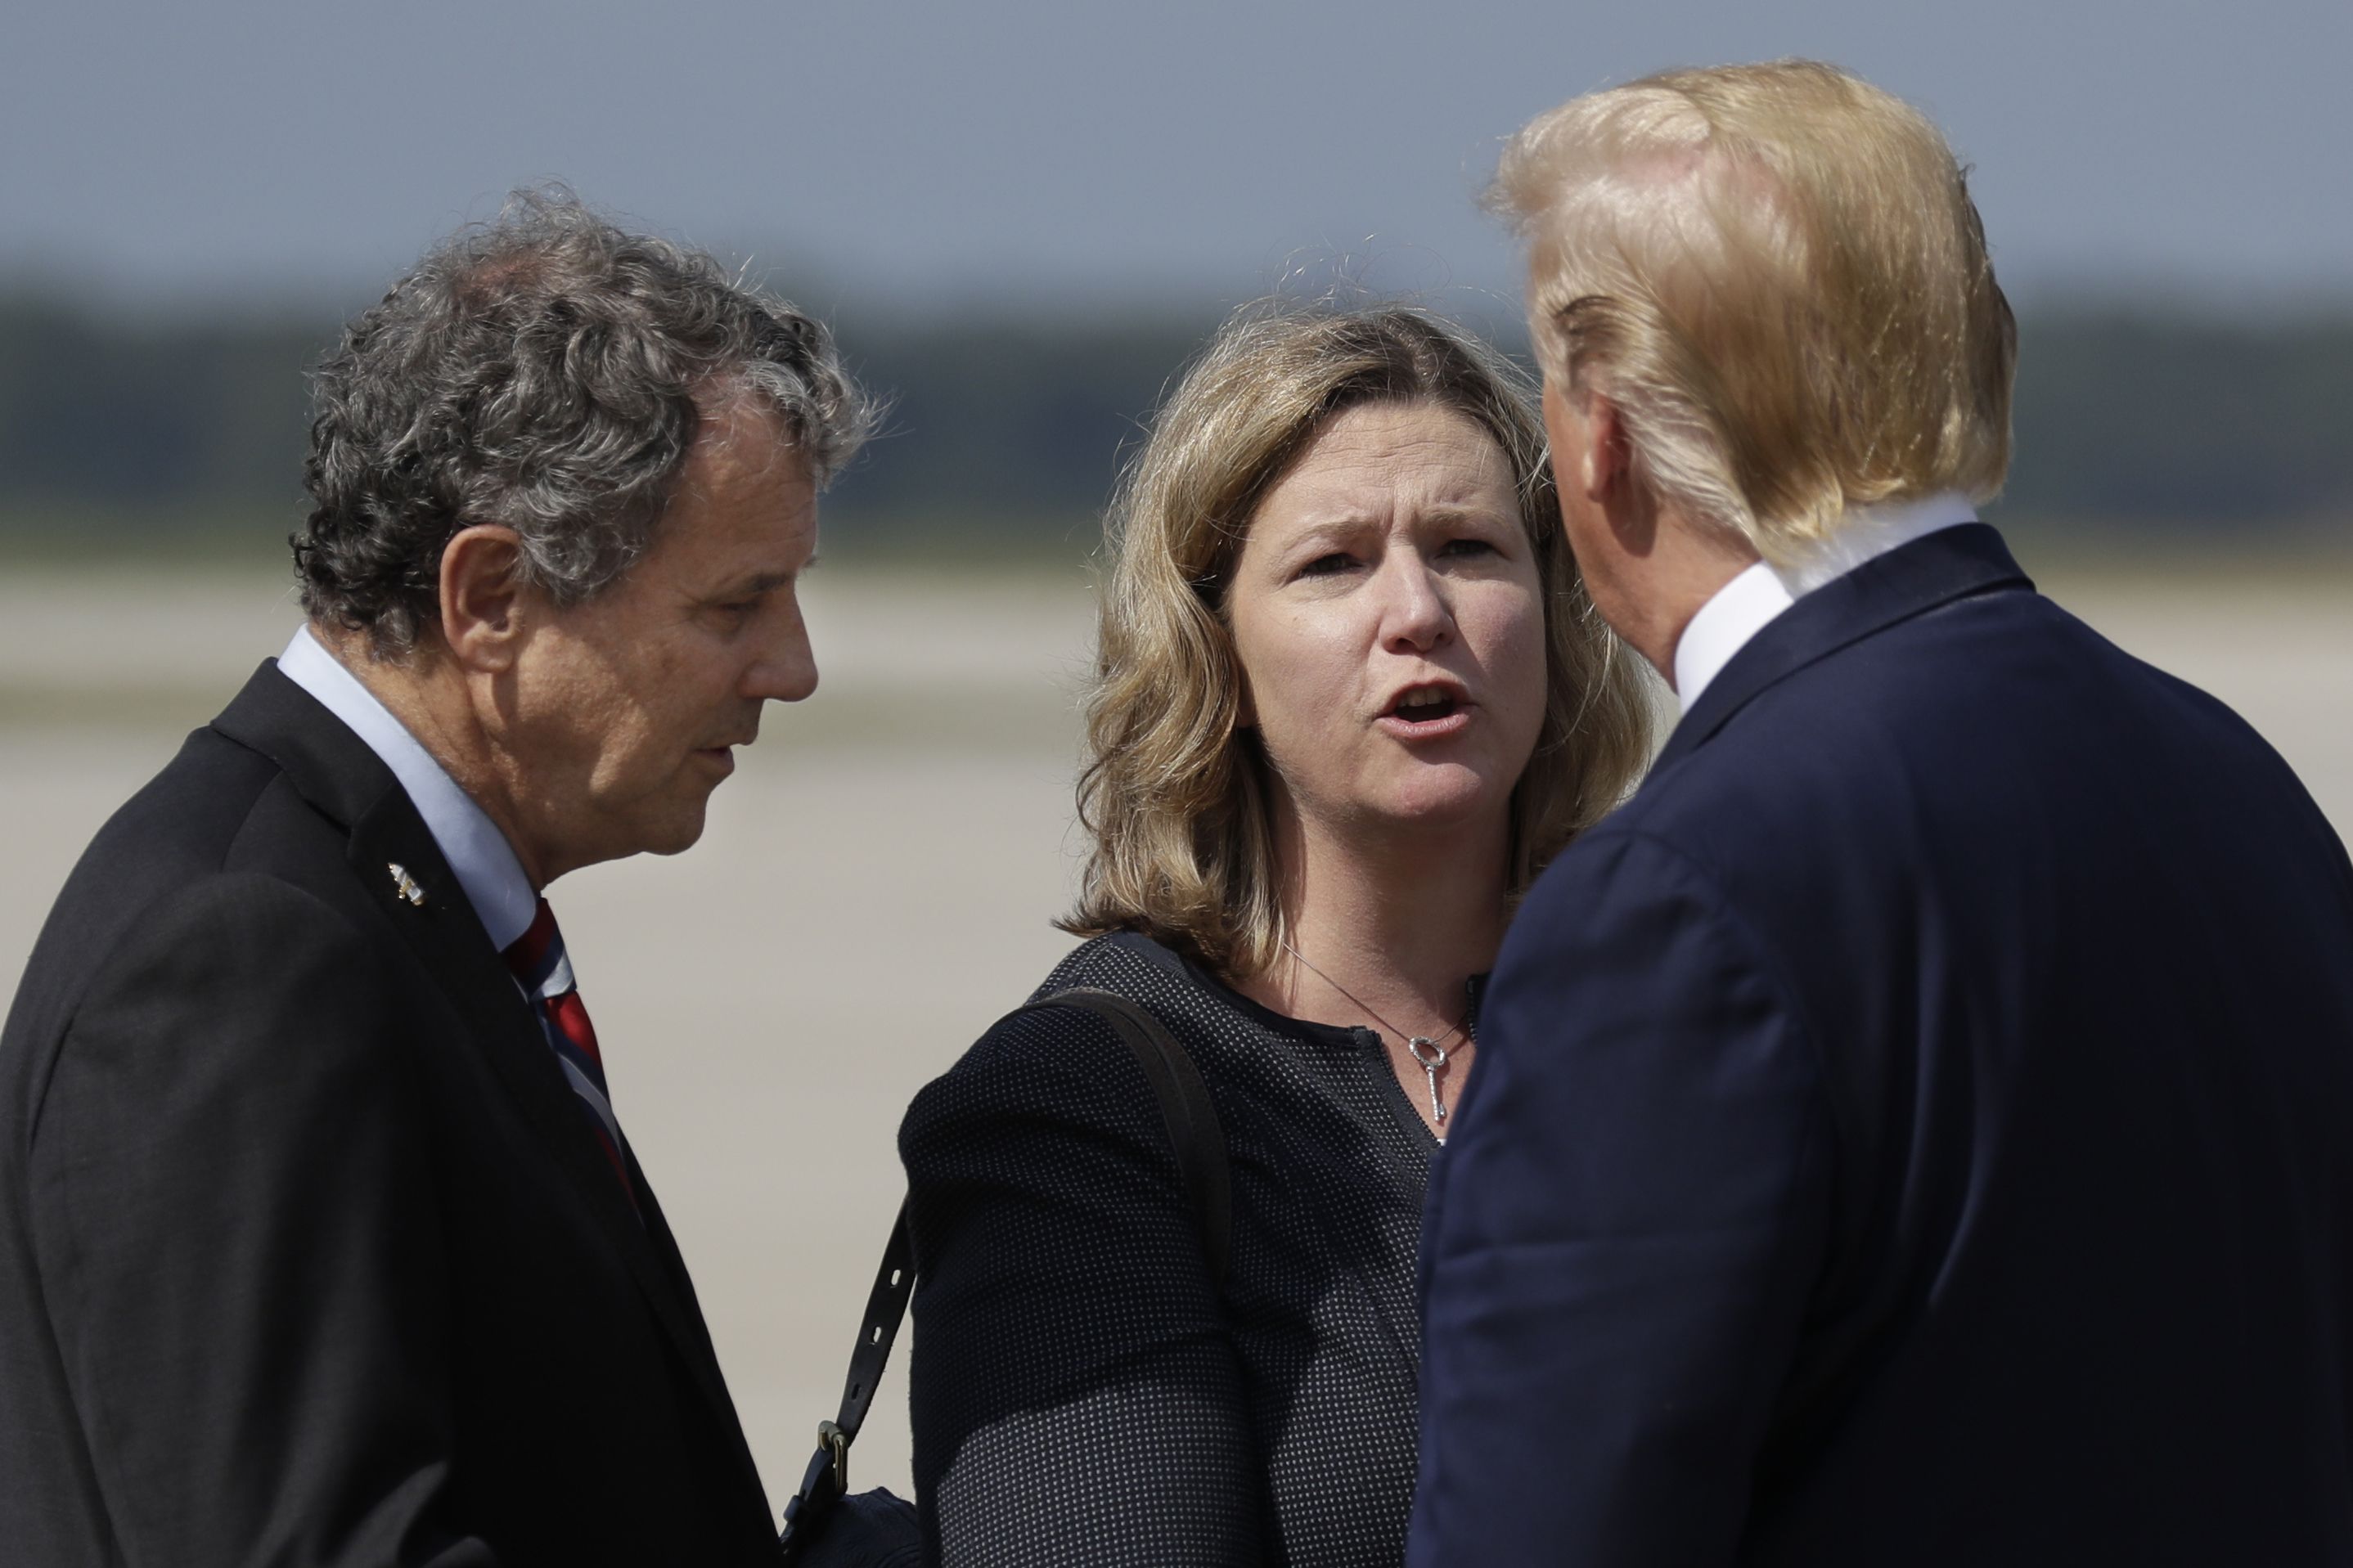 Trump is greeted by Dayton Mayor Nan Whaley and Sen. Sherrod Brown, D-Ohio